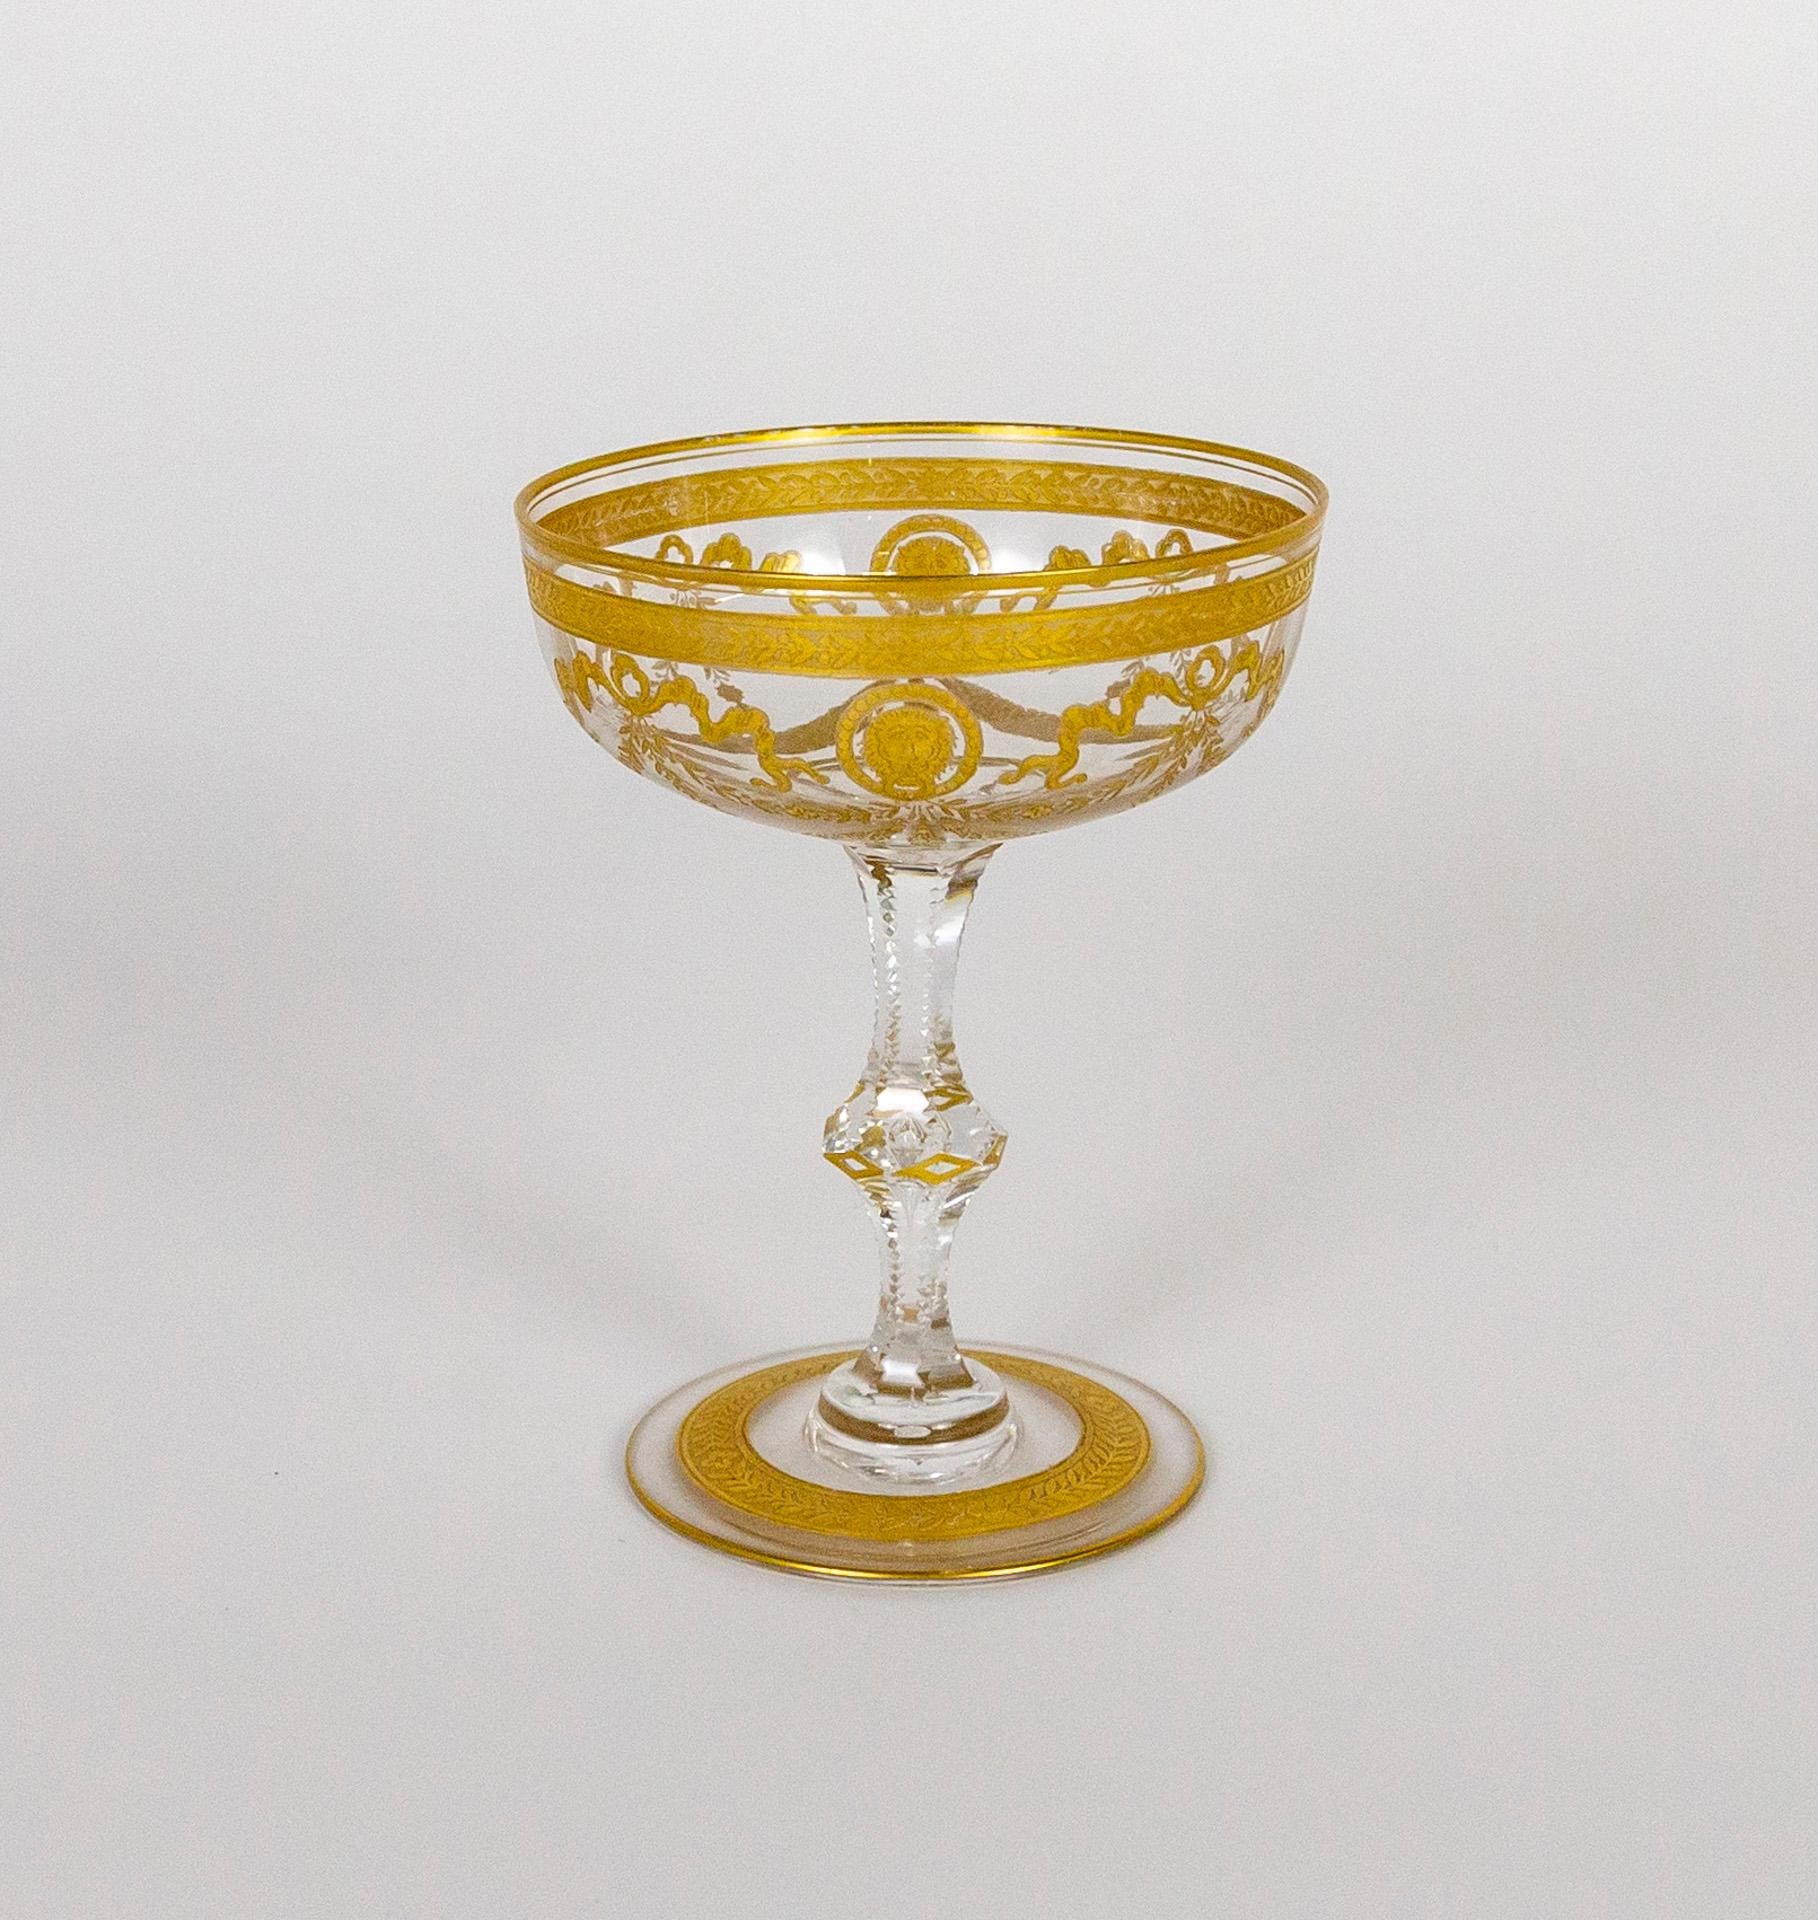 A set of 2, antique, mouth-blown, coupe champagne glasses, cut and etched, with an intricate gold motif of ribbon, floral garlands, and lion faces. Made by the renowned St. Louis glass company in France in the early 1900s. Measures: 4.75